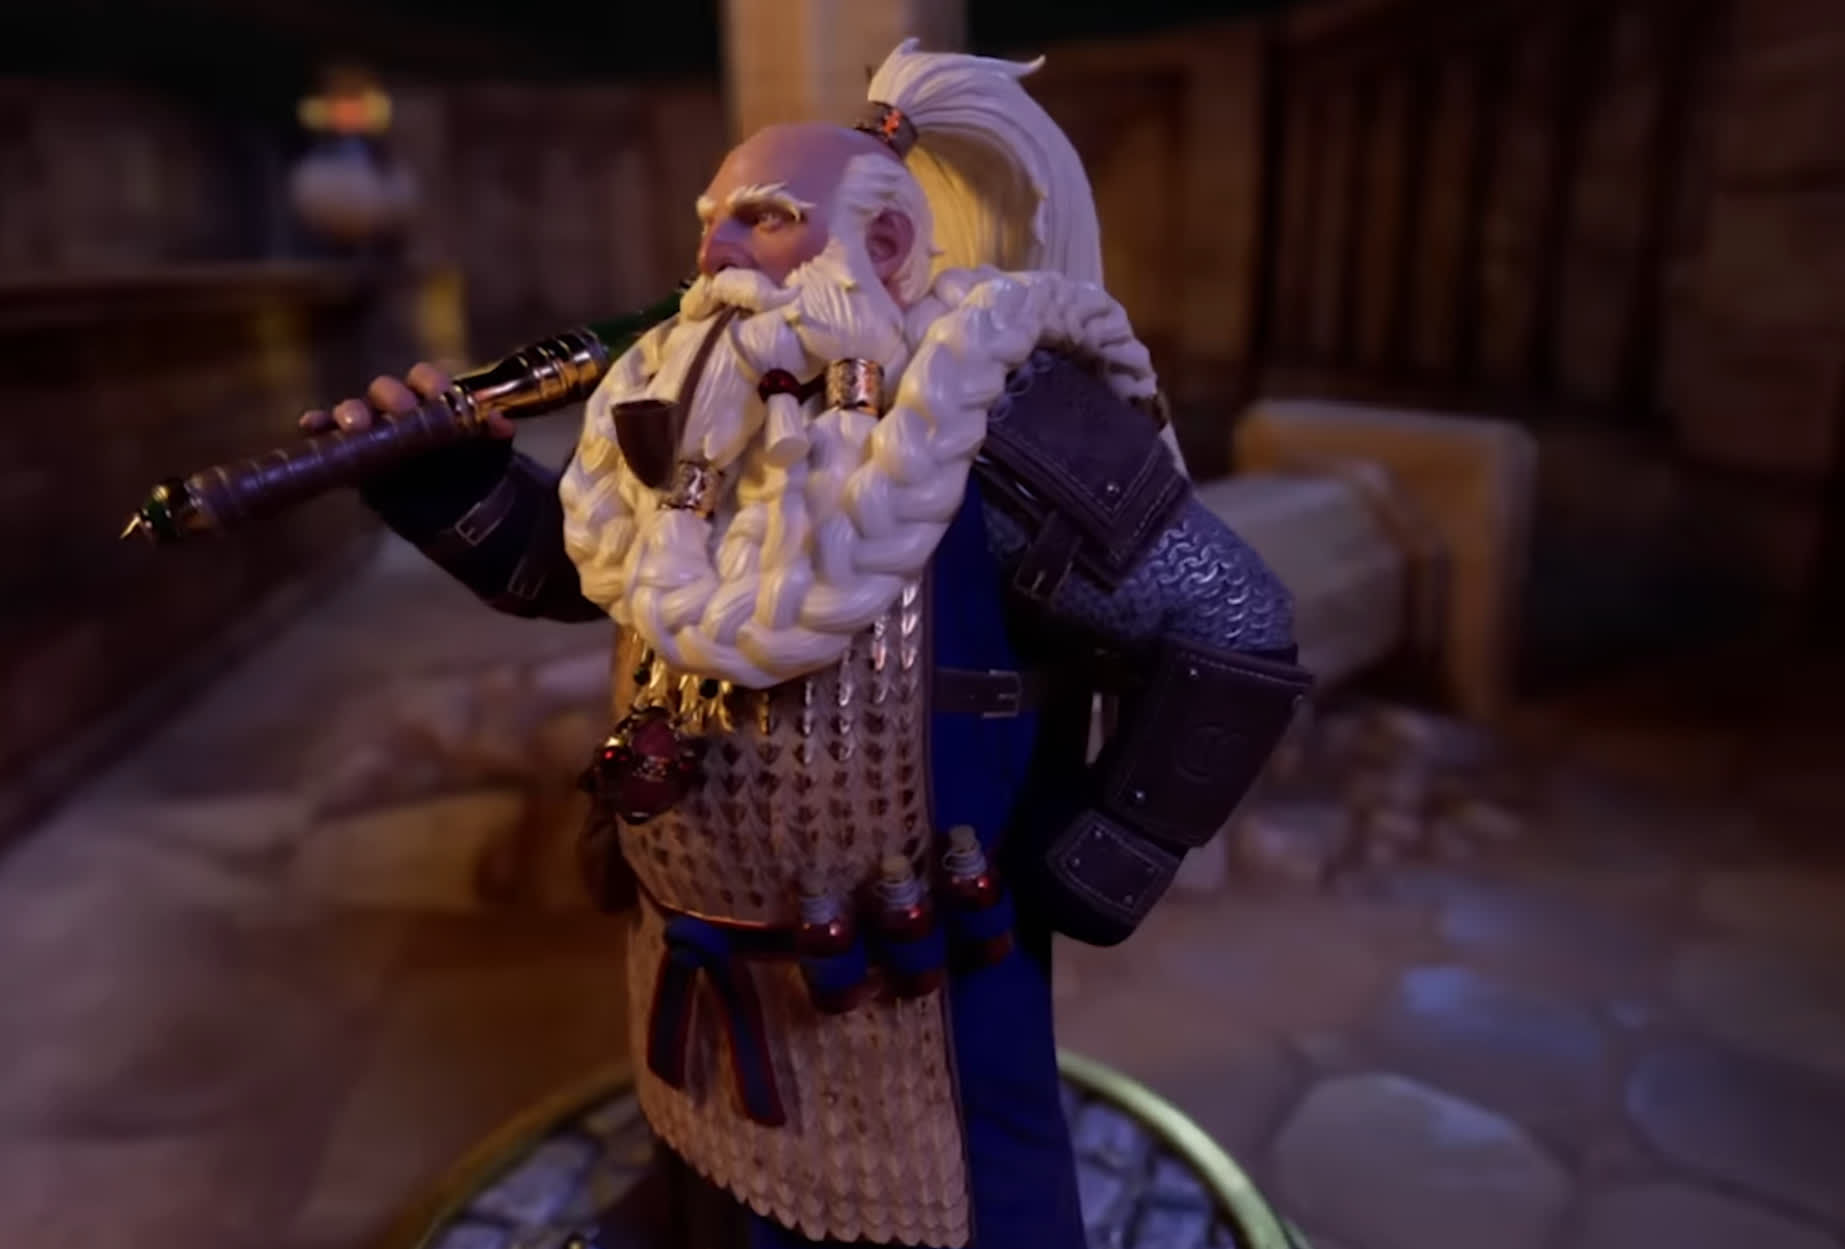 An official Dungeons & Dragons tabletop experience is now in development using Unreal Engine 5